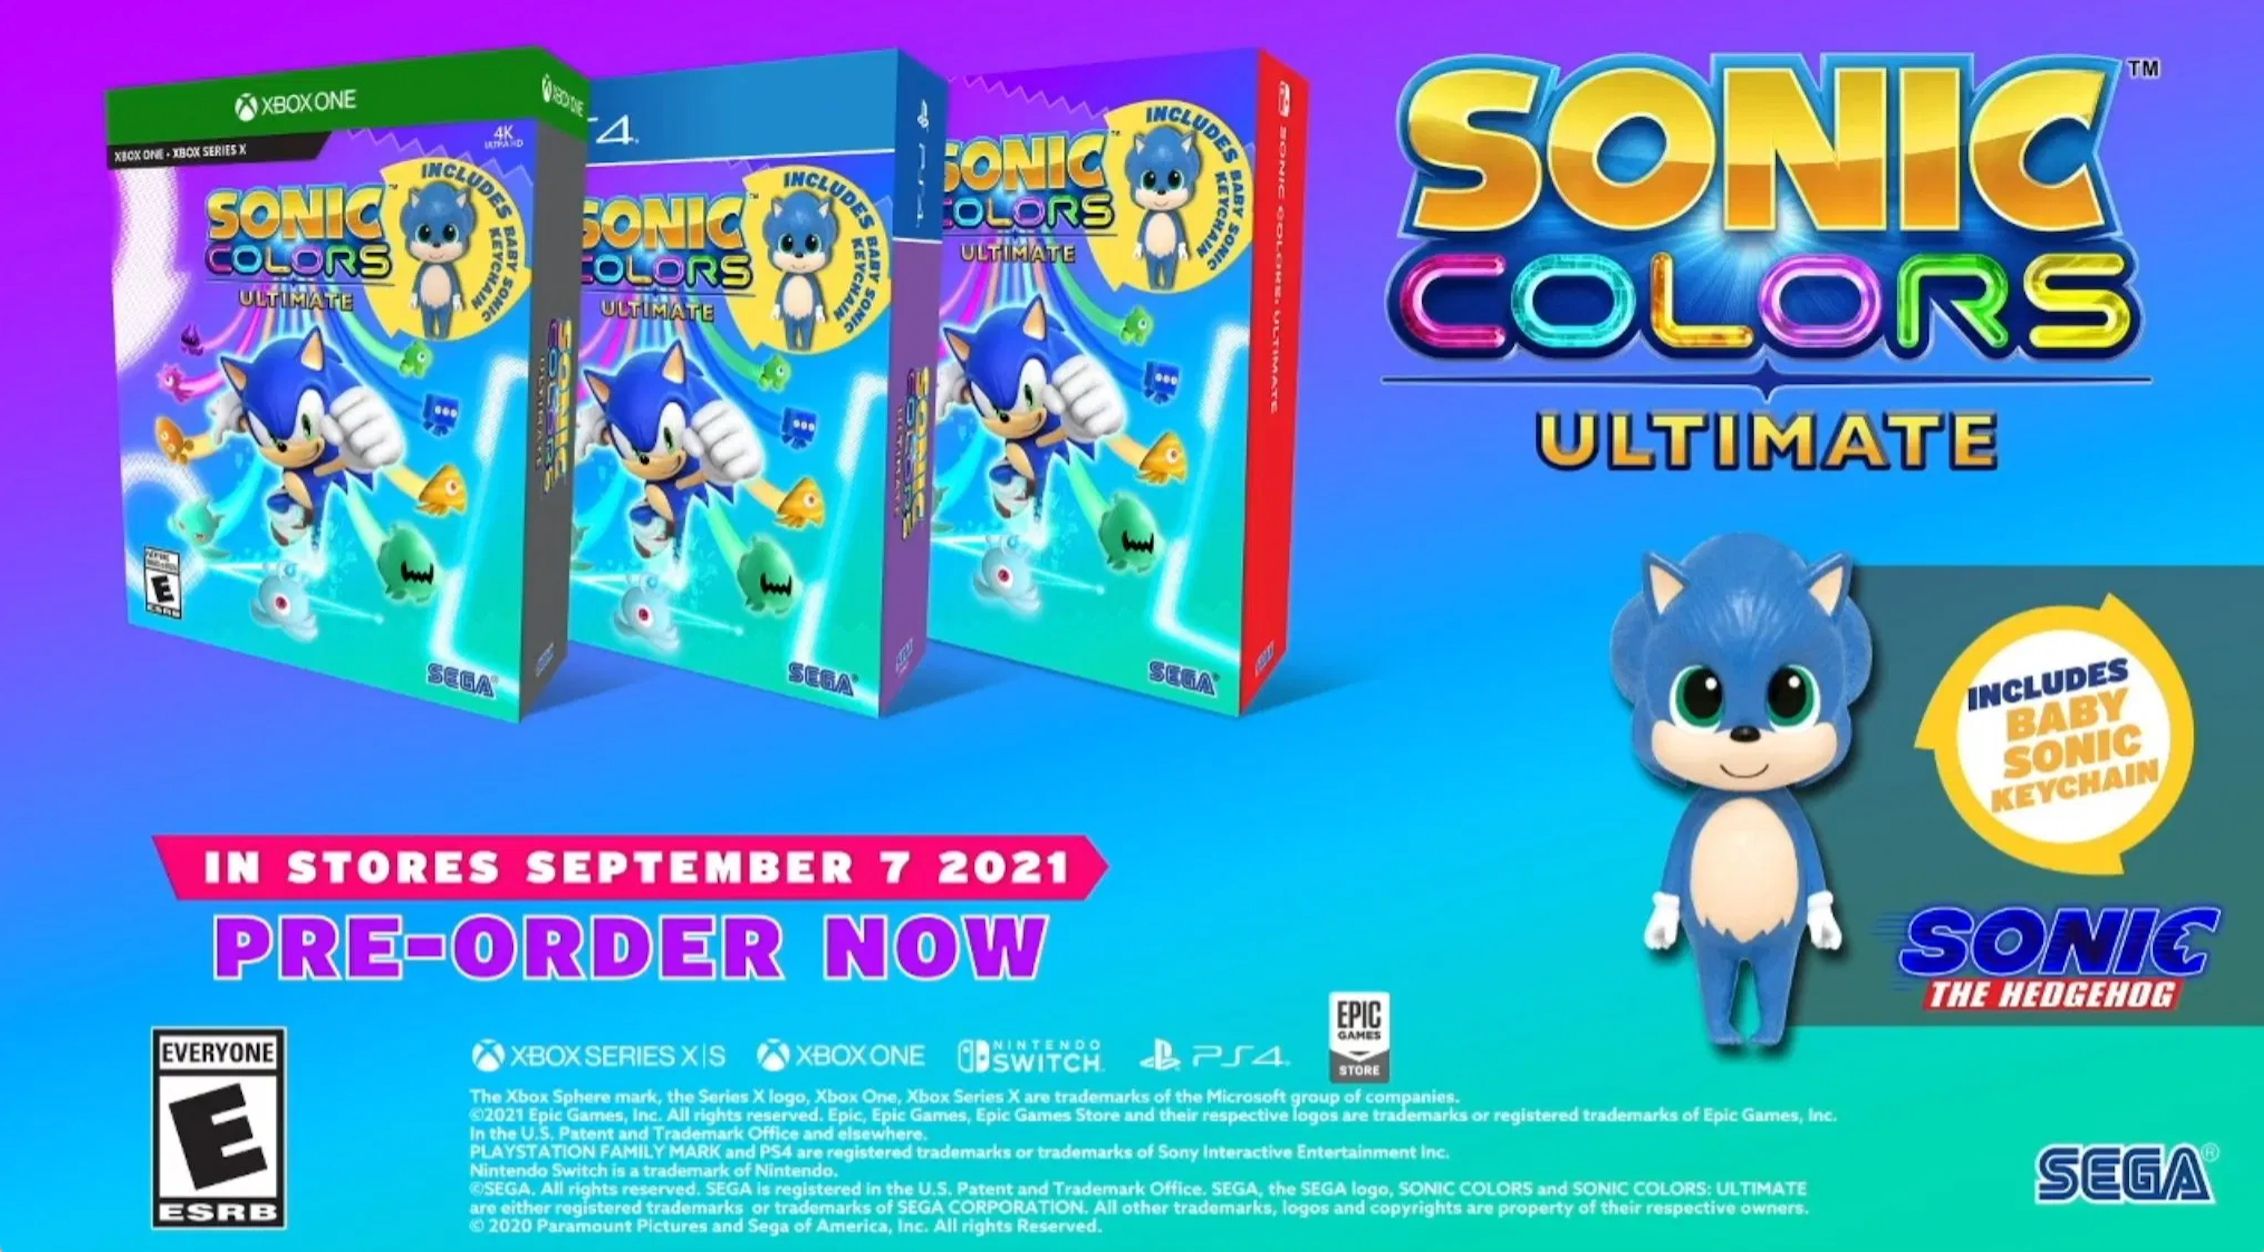 Sonic Colors Ultimate ad